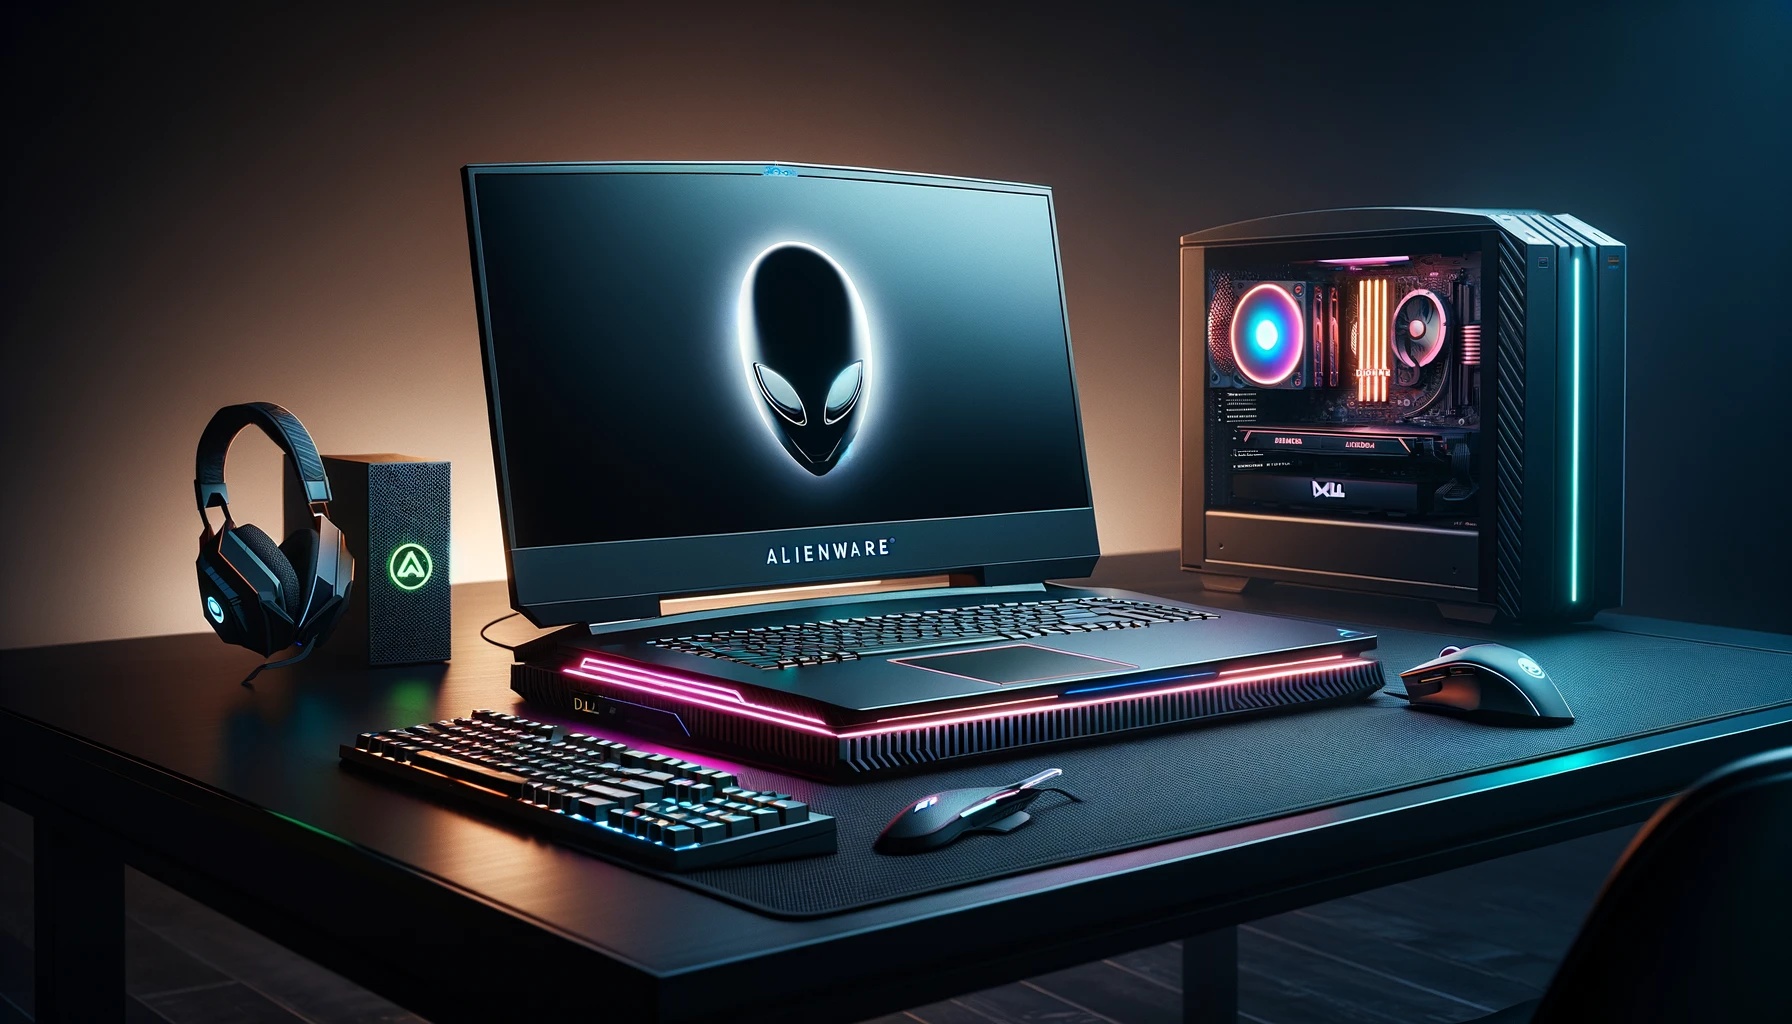 The image above showcases a 3D stock photo of a Dell Alienware gaming laptop, set against a minimalistic gaming setup with high-performance accessories, all under the glow of subtle RGB lighting, highlighting the elegance and power of Dell's gaming technology.